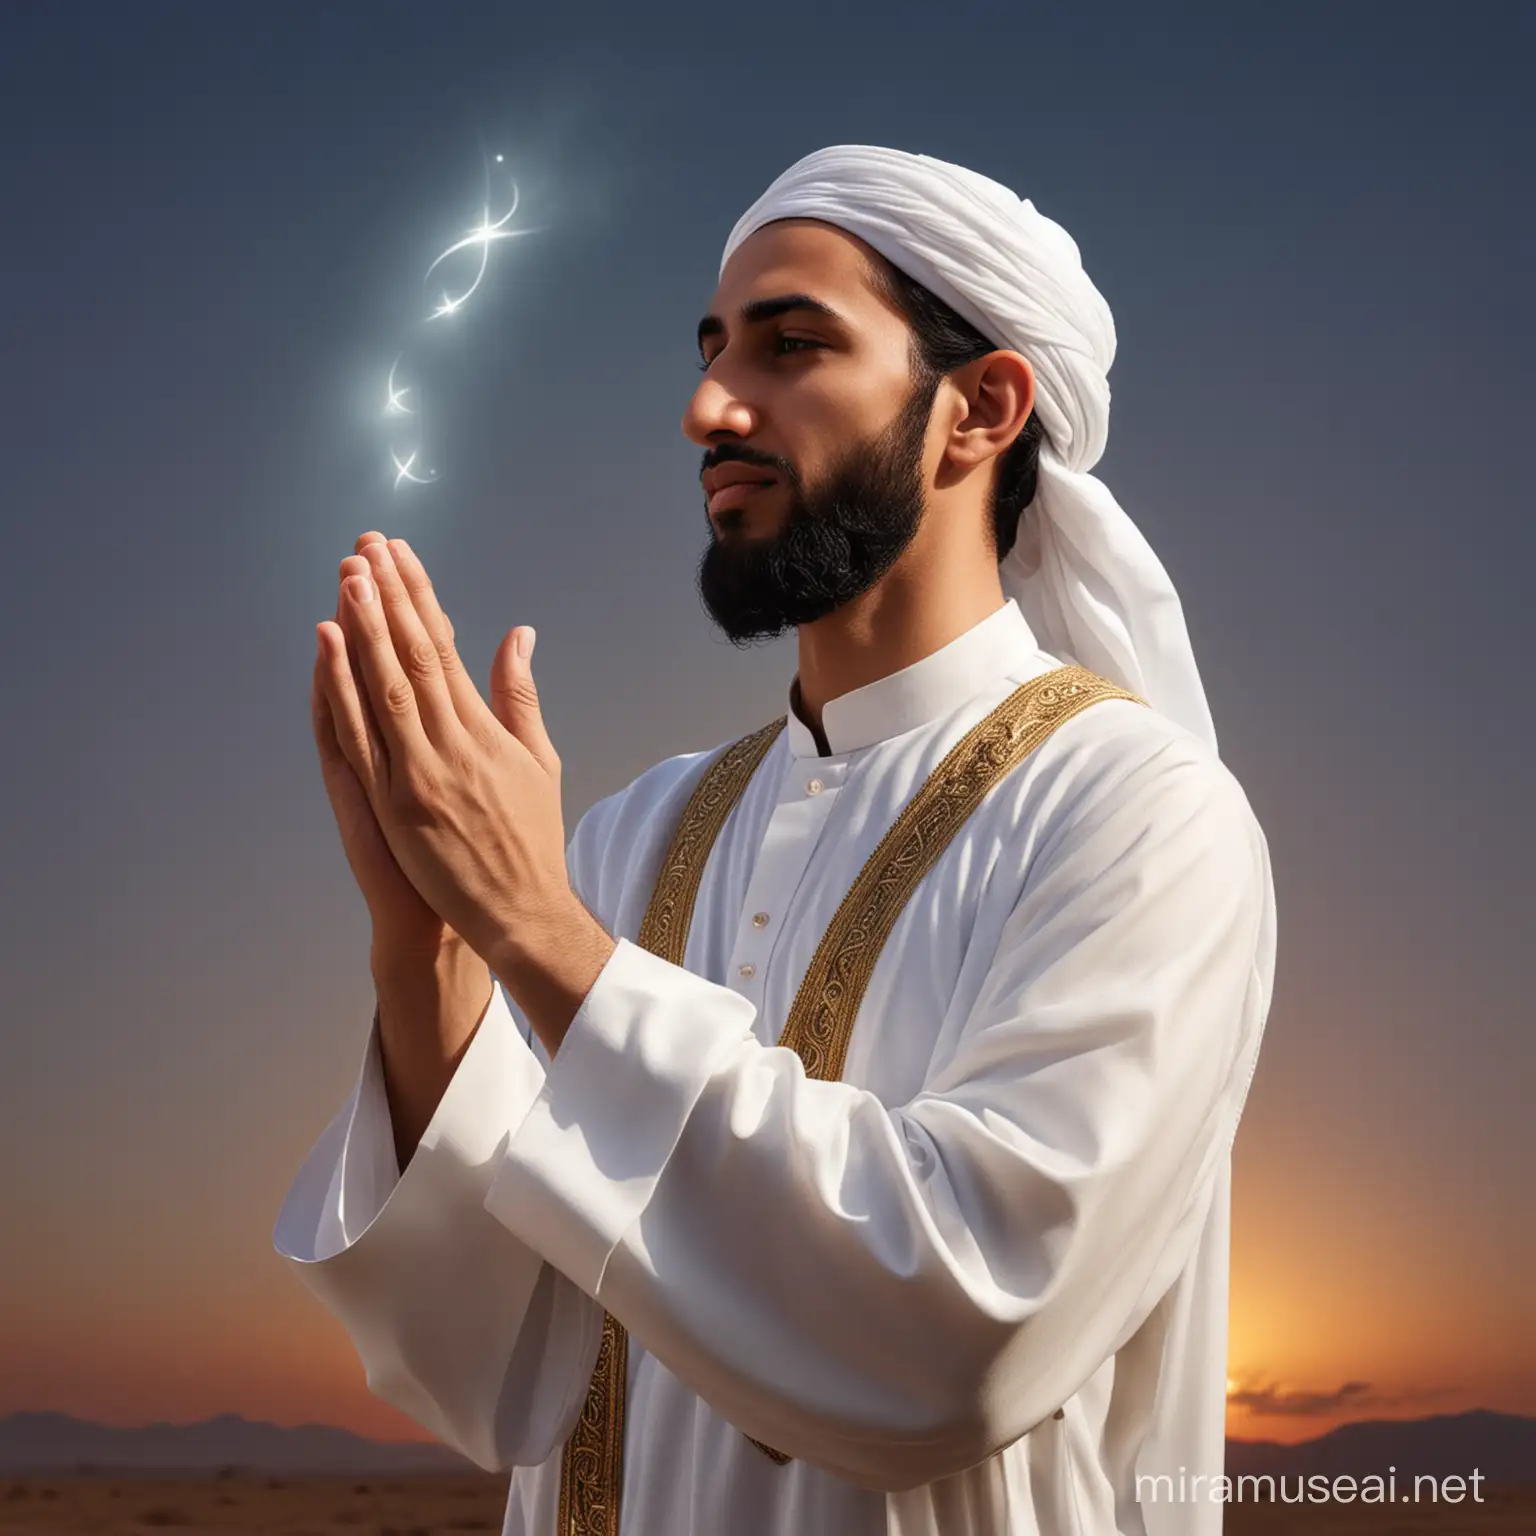 Prophet Muhammad pbuh Offering Humble Supplication to the Divine